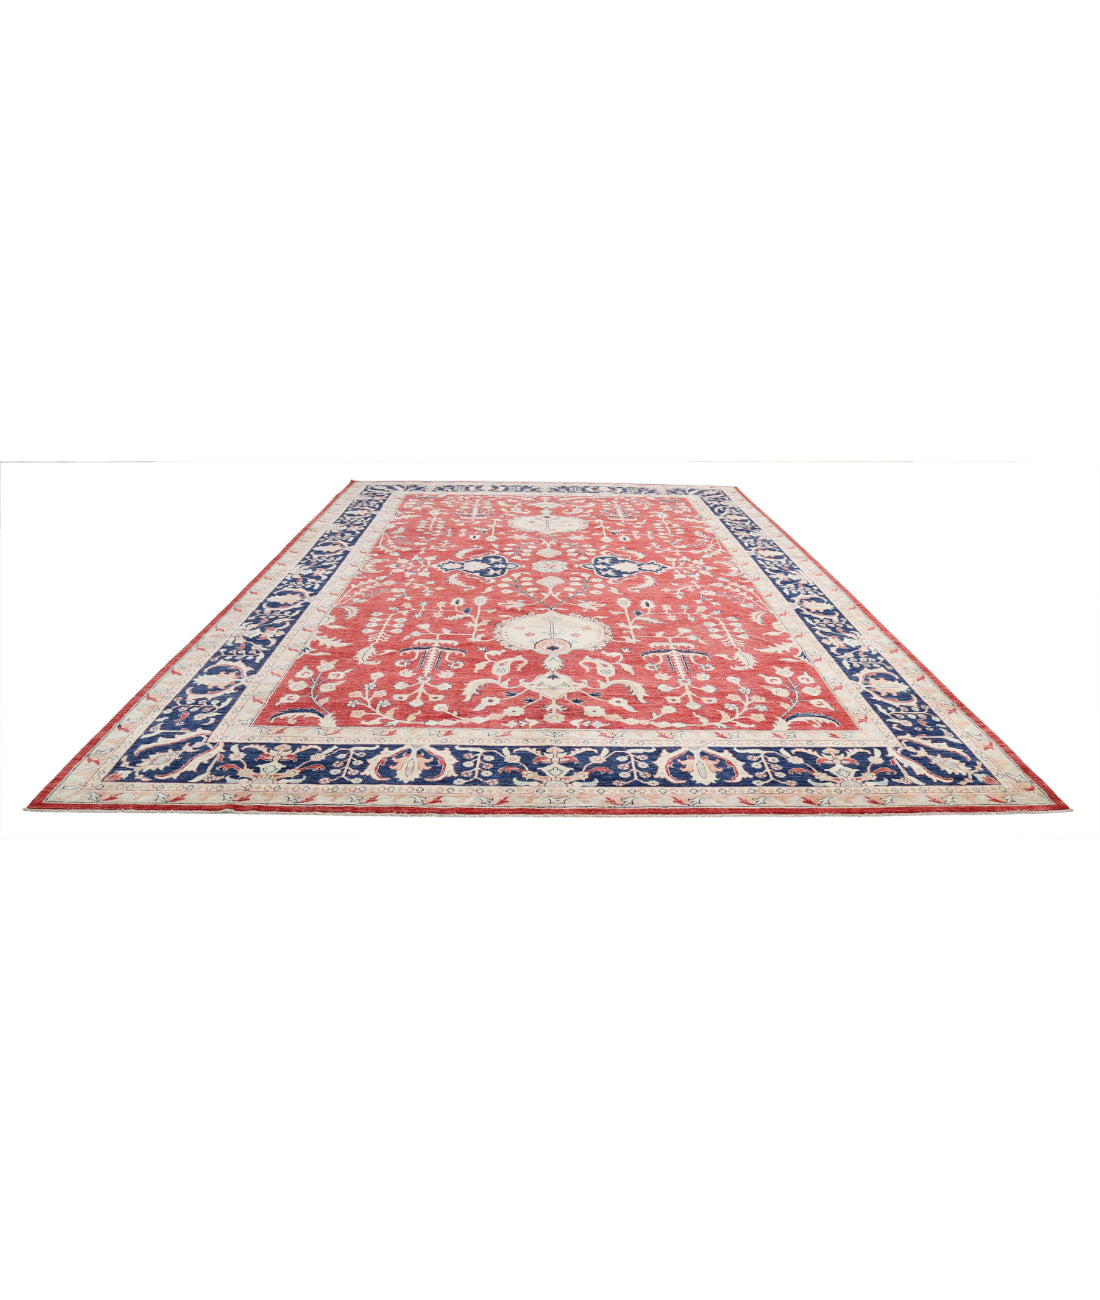 Ziegler 11'6'' X 16'9'' Hand-Knotted Wool Rug 11'6'' x 16'9'' (345 X 503) / Red / Blue